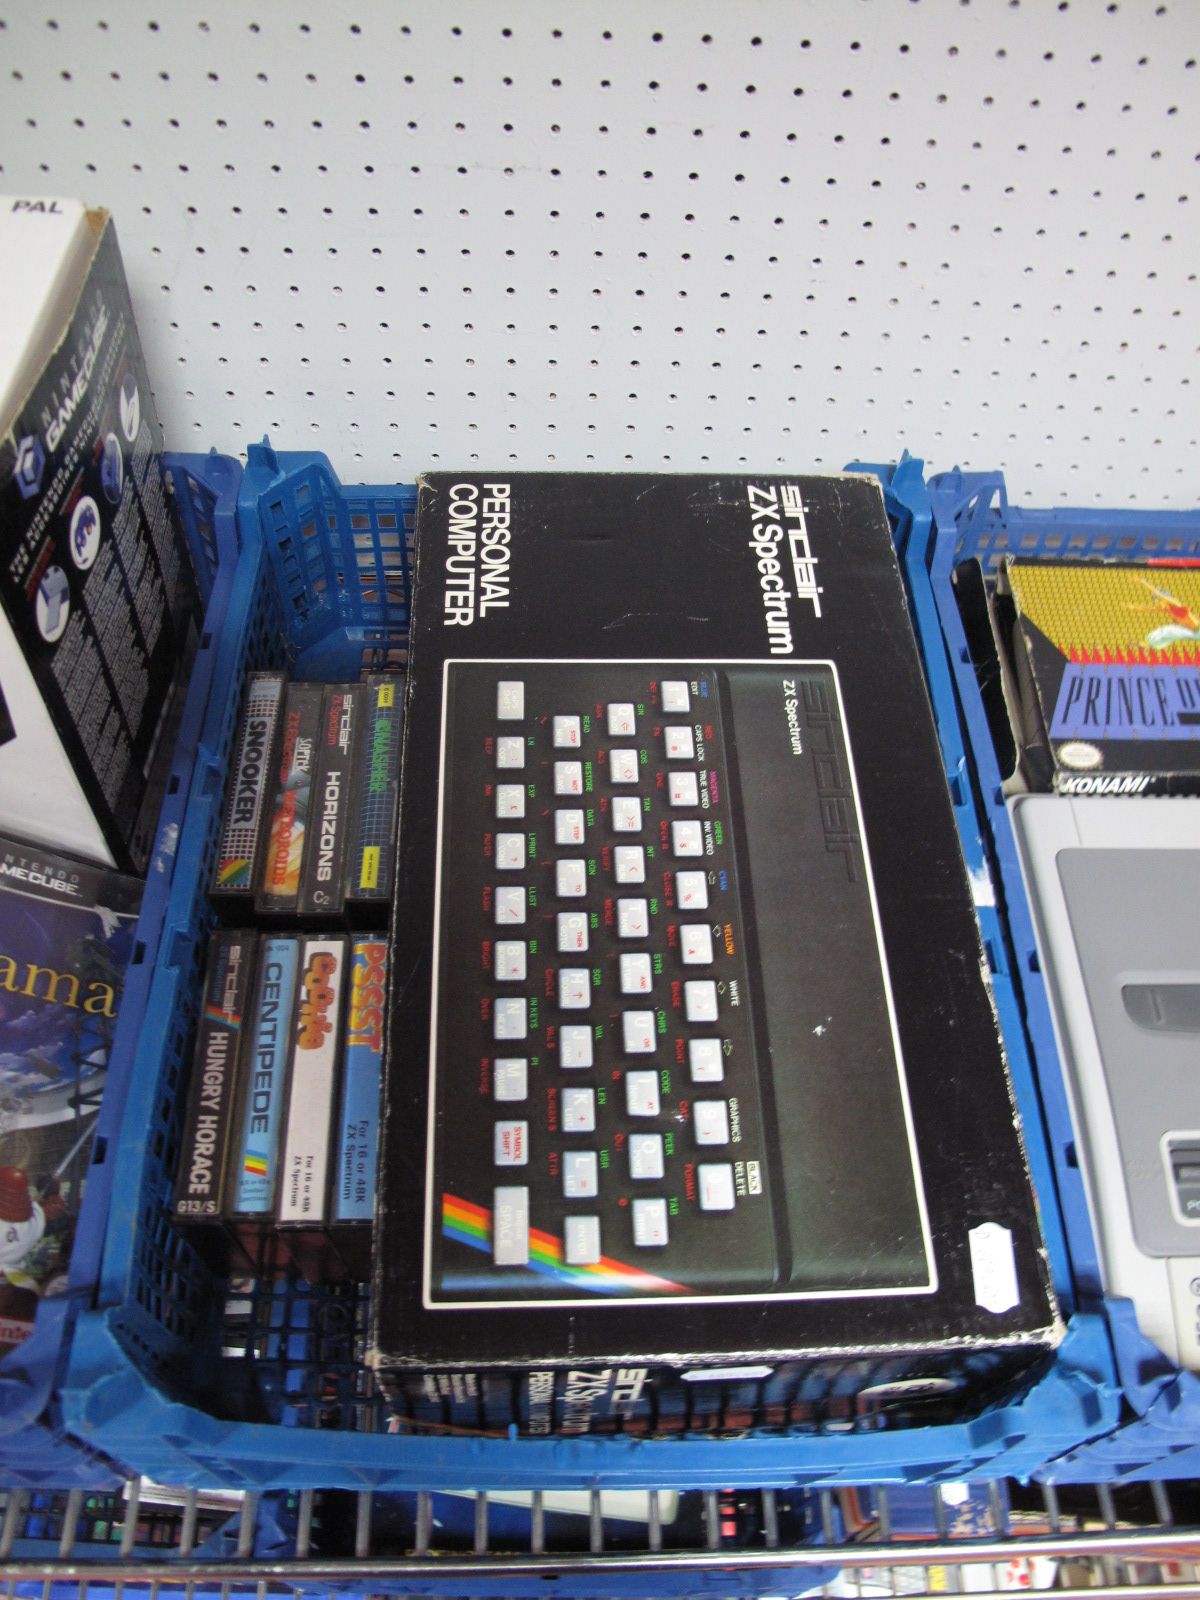 A Boxed Sinclair ZX Spectrum. 1982 with 16K RAM, power supply, cassette leads, basic programming